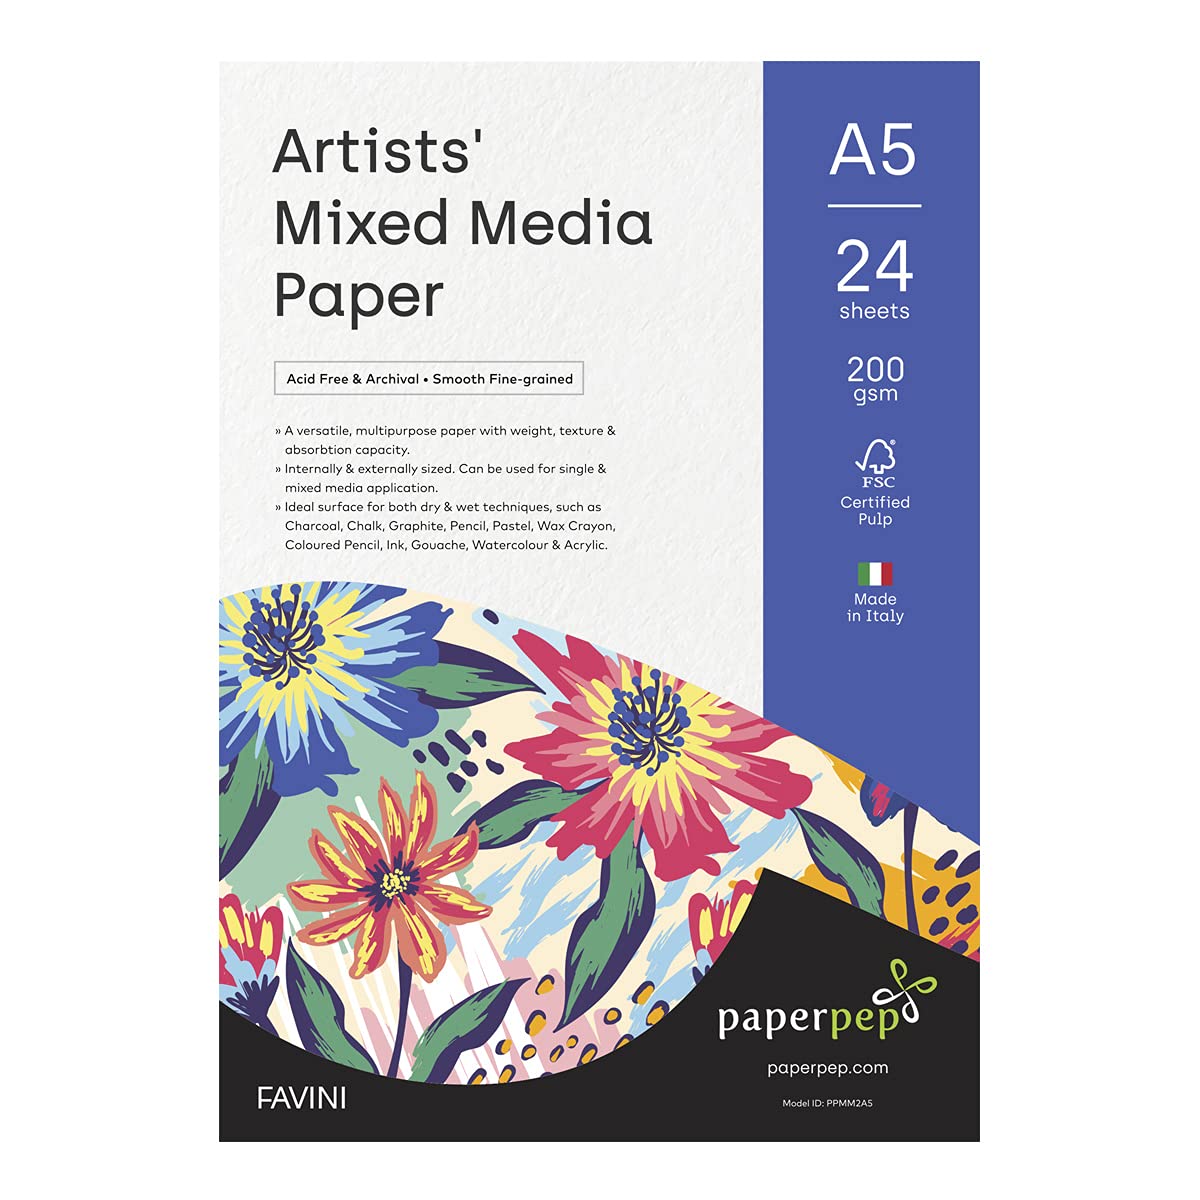 PaperPep Artists' Mixed Media Paper 200GSM A5 Pack of 48 for Charcoal, Chalk, Graphite, Pencil, Pastel, Wax Crayon, Coloured Pencil, Ink, Gouache, Watercolour & Acrylic for Artists' & Amateurs